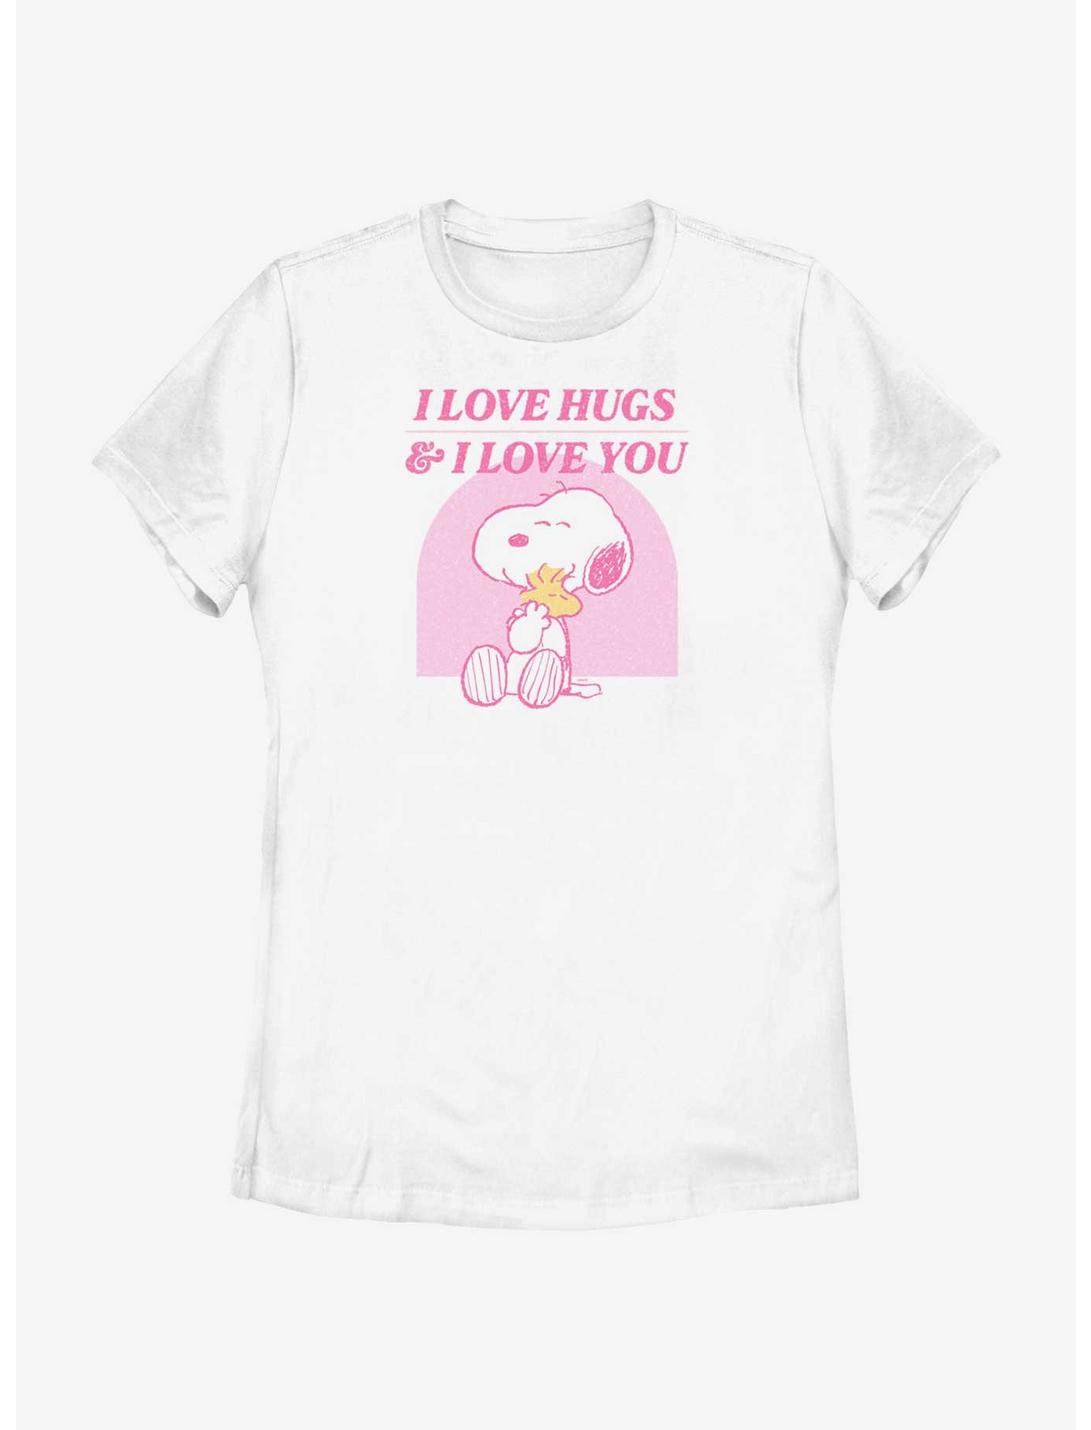 Peanuts Snoopy & Woodstock I Love Hugs And You Womens T-Shirt, WHITE, hi-res